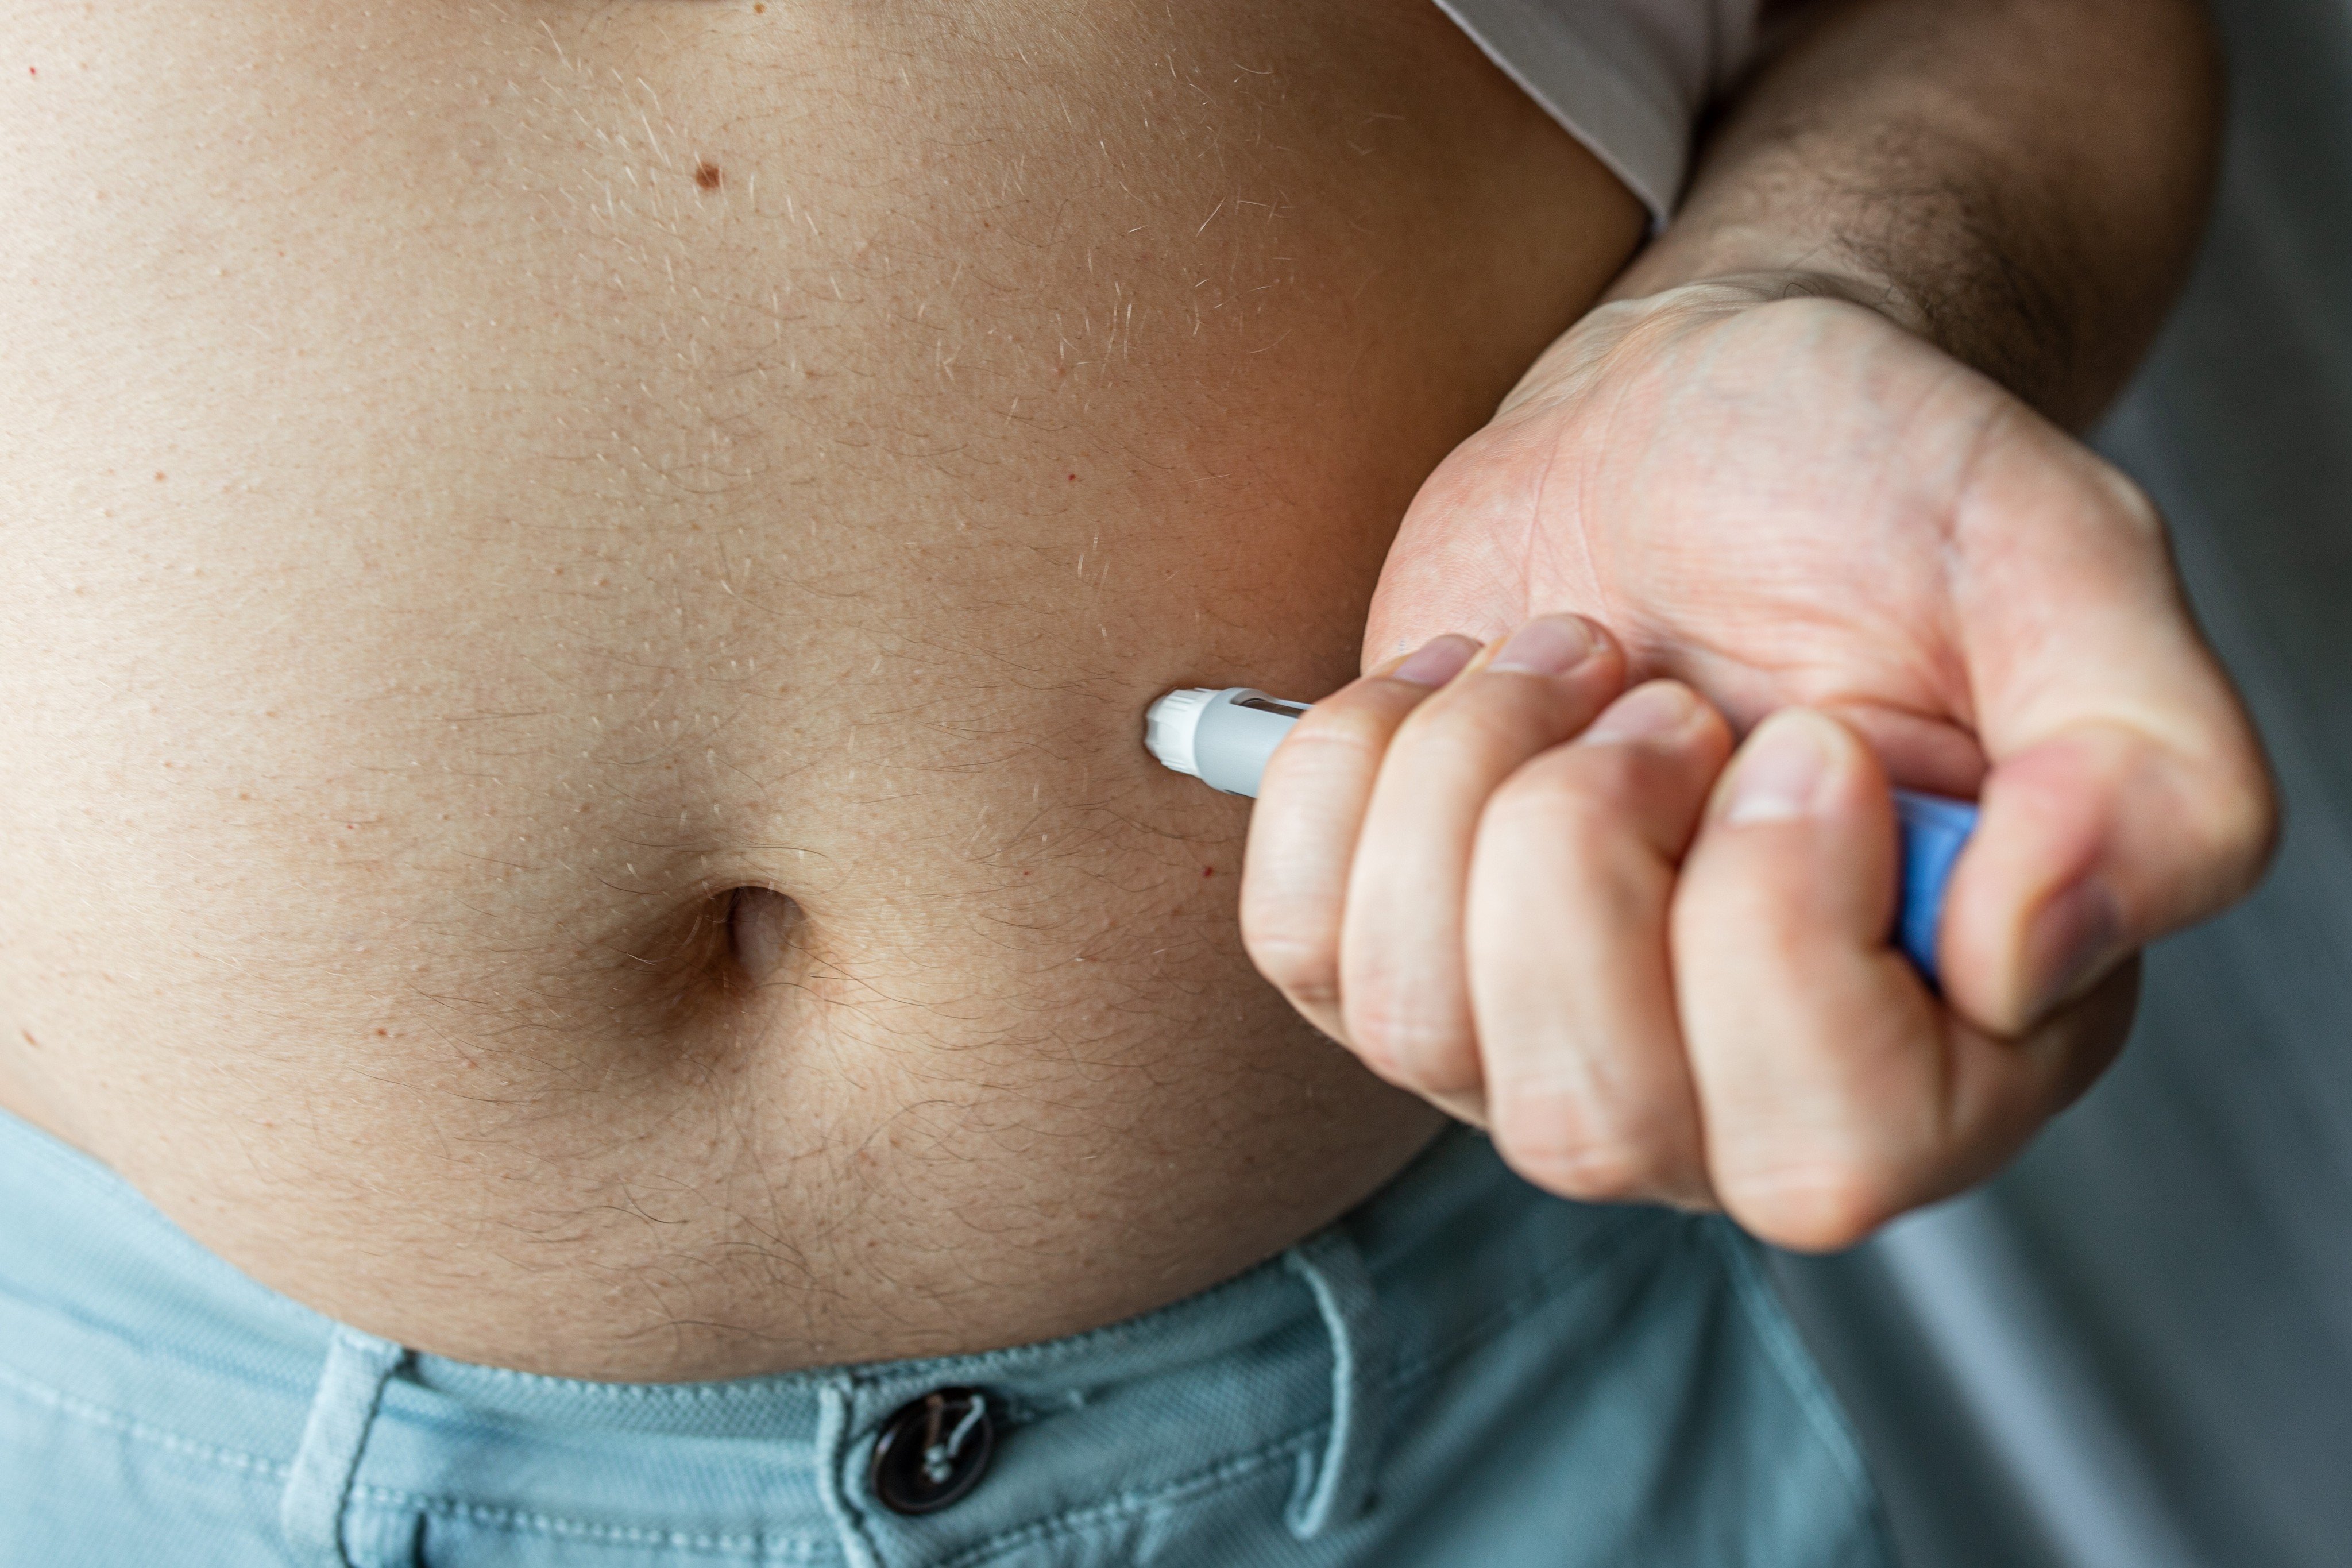 British author Johann Hari describes weight-loss drug Ozempic as magical in his new book Magic Pill. Photo: Shutterstock